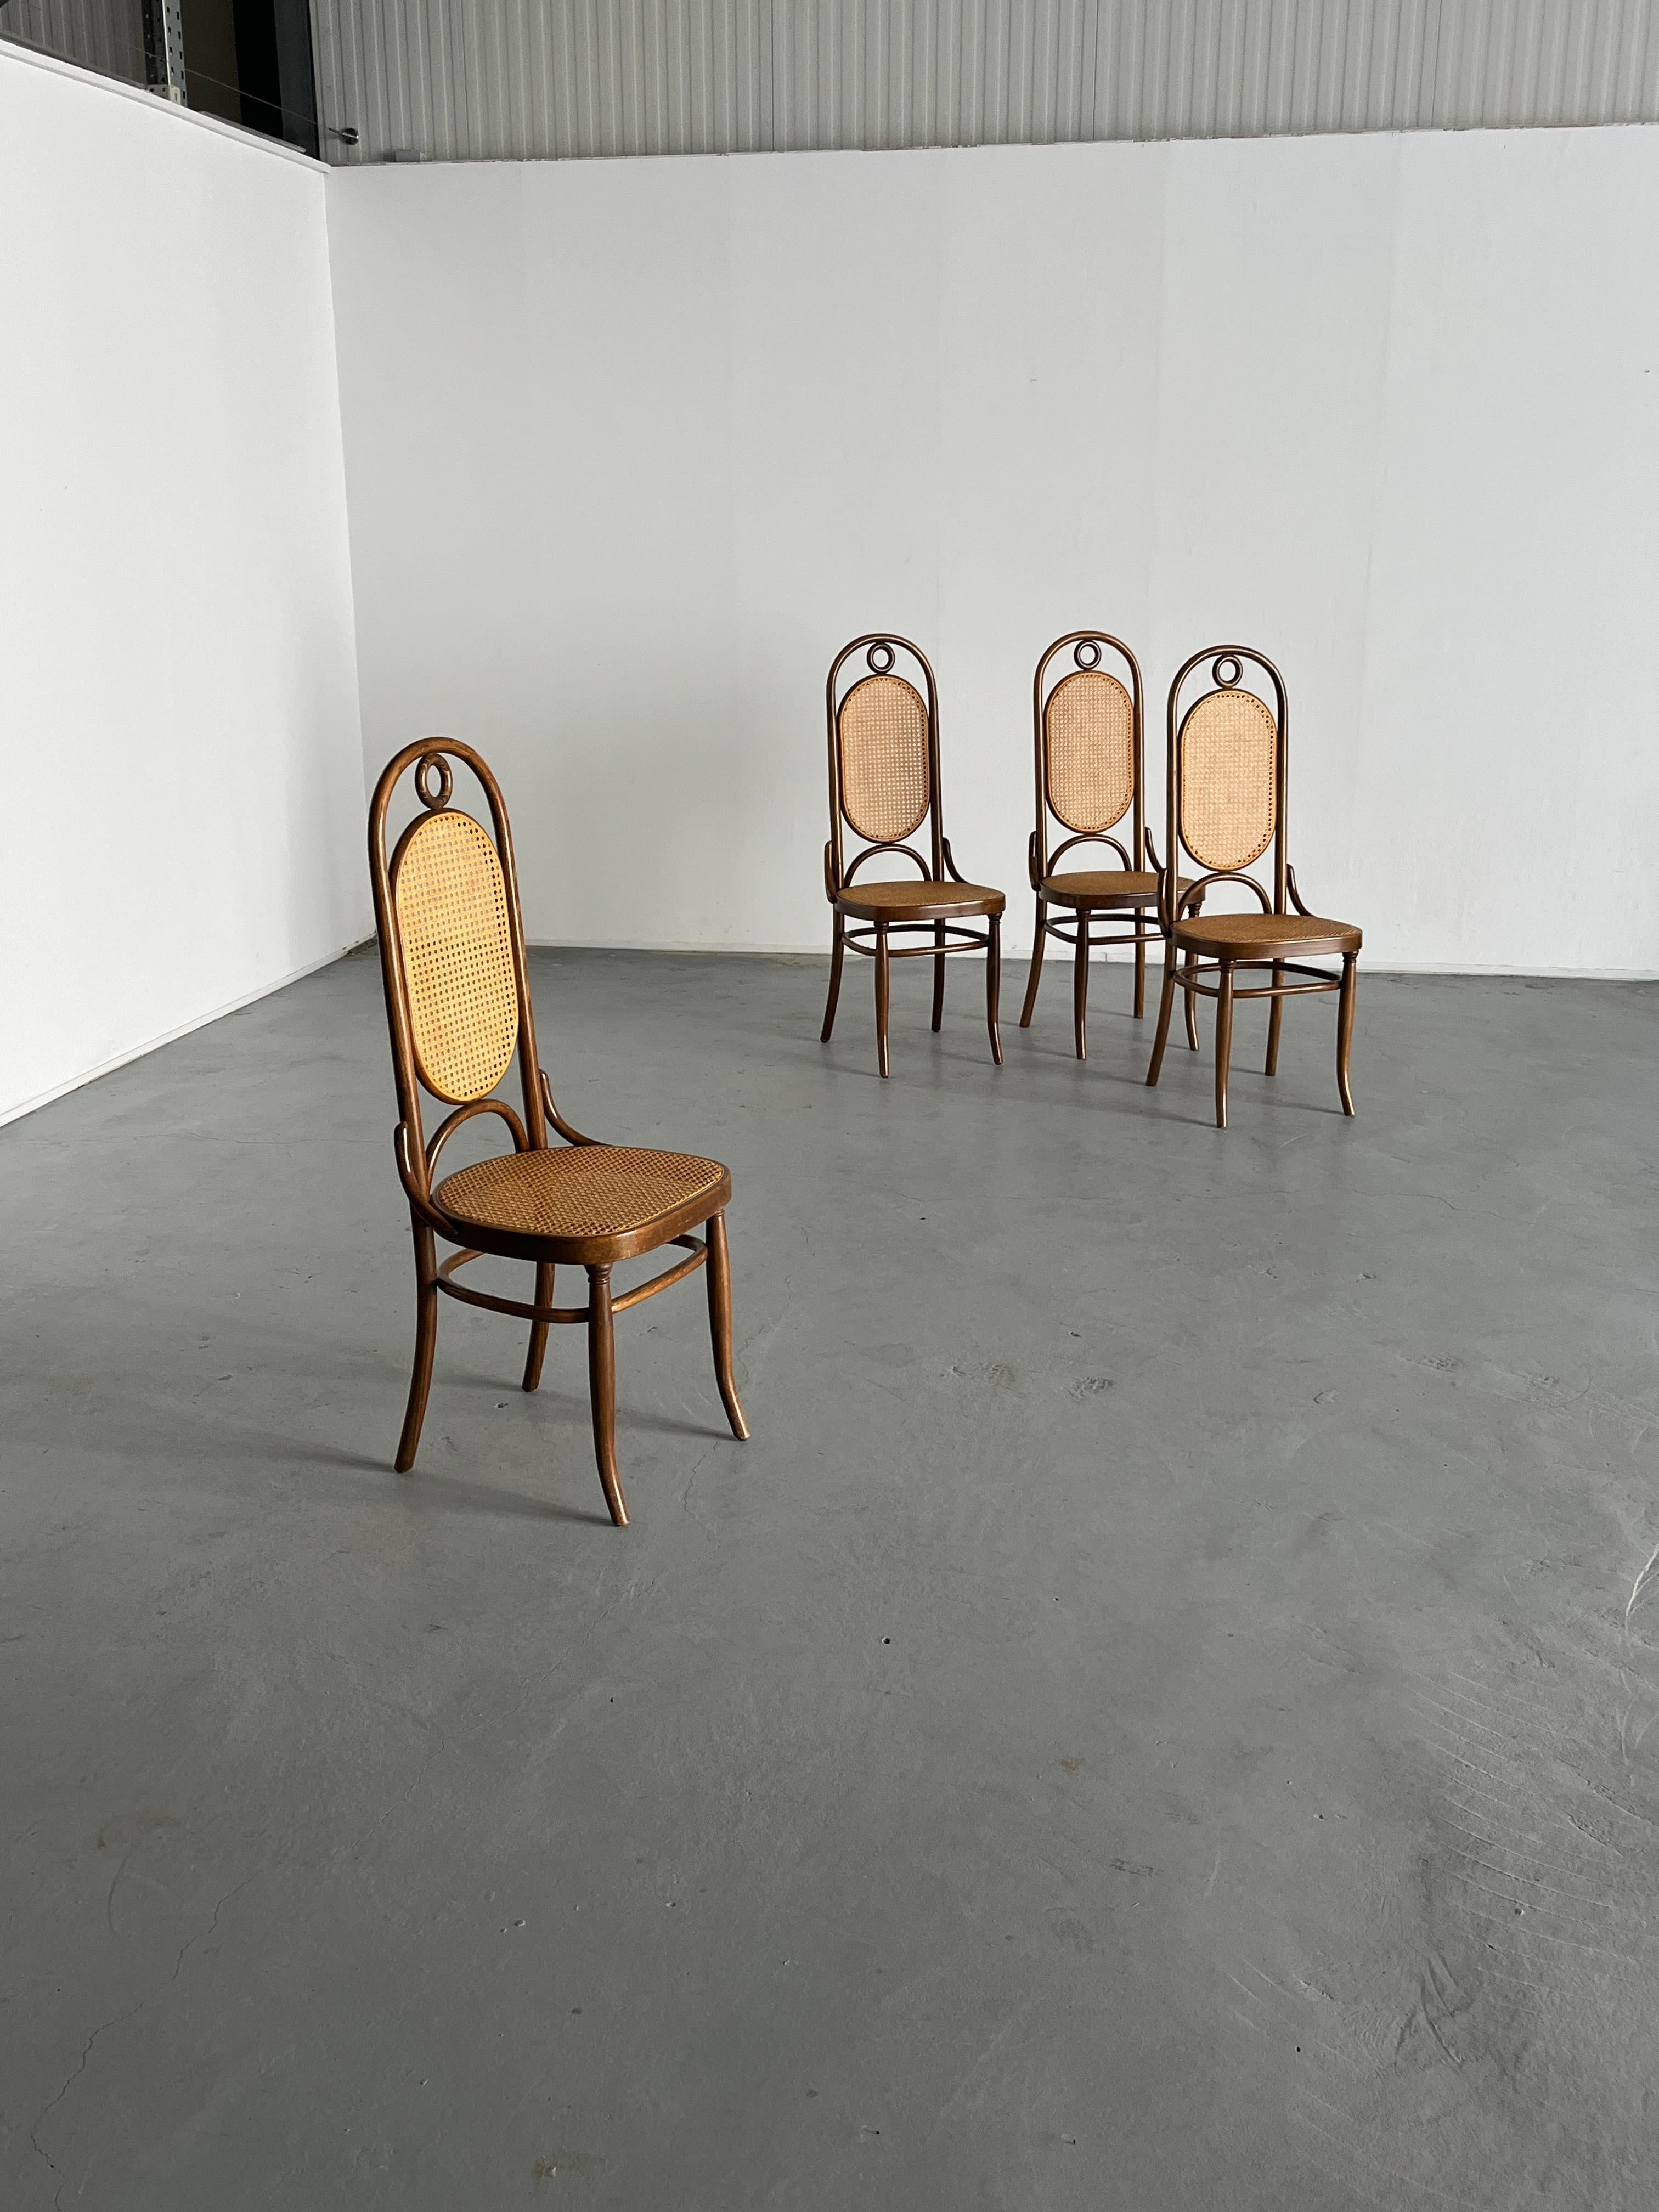 A set of four beautiful Thonet bentwood chairs, popular high backrest known as model 207R or model no. 17.
Unlabeled, most probably a vintage Thonet Mundus production of the late 1970s.

Overall in very good vintage condition with expected signs of